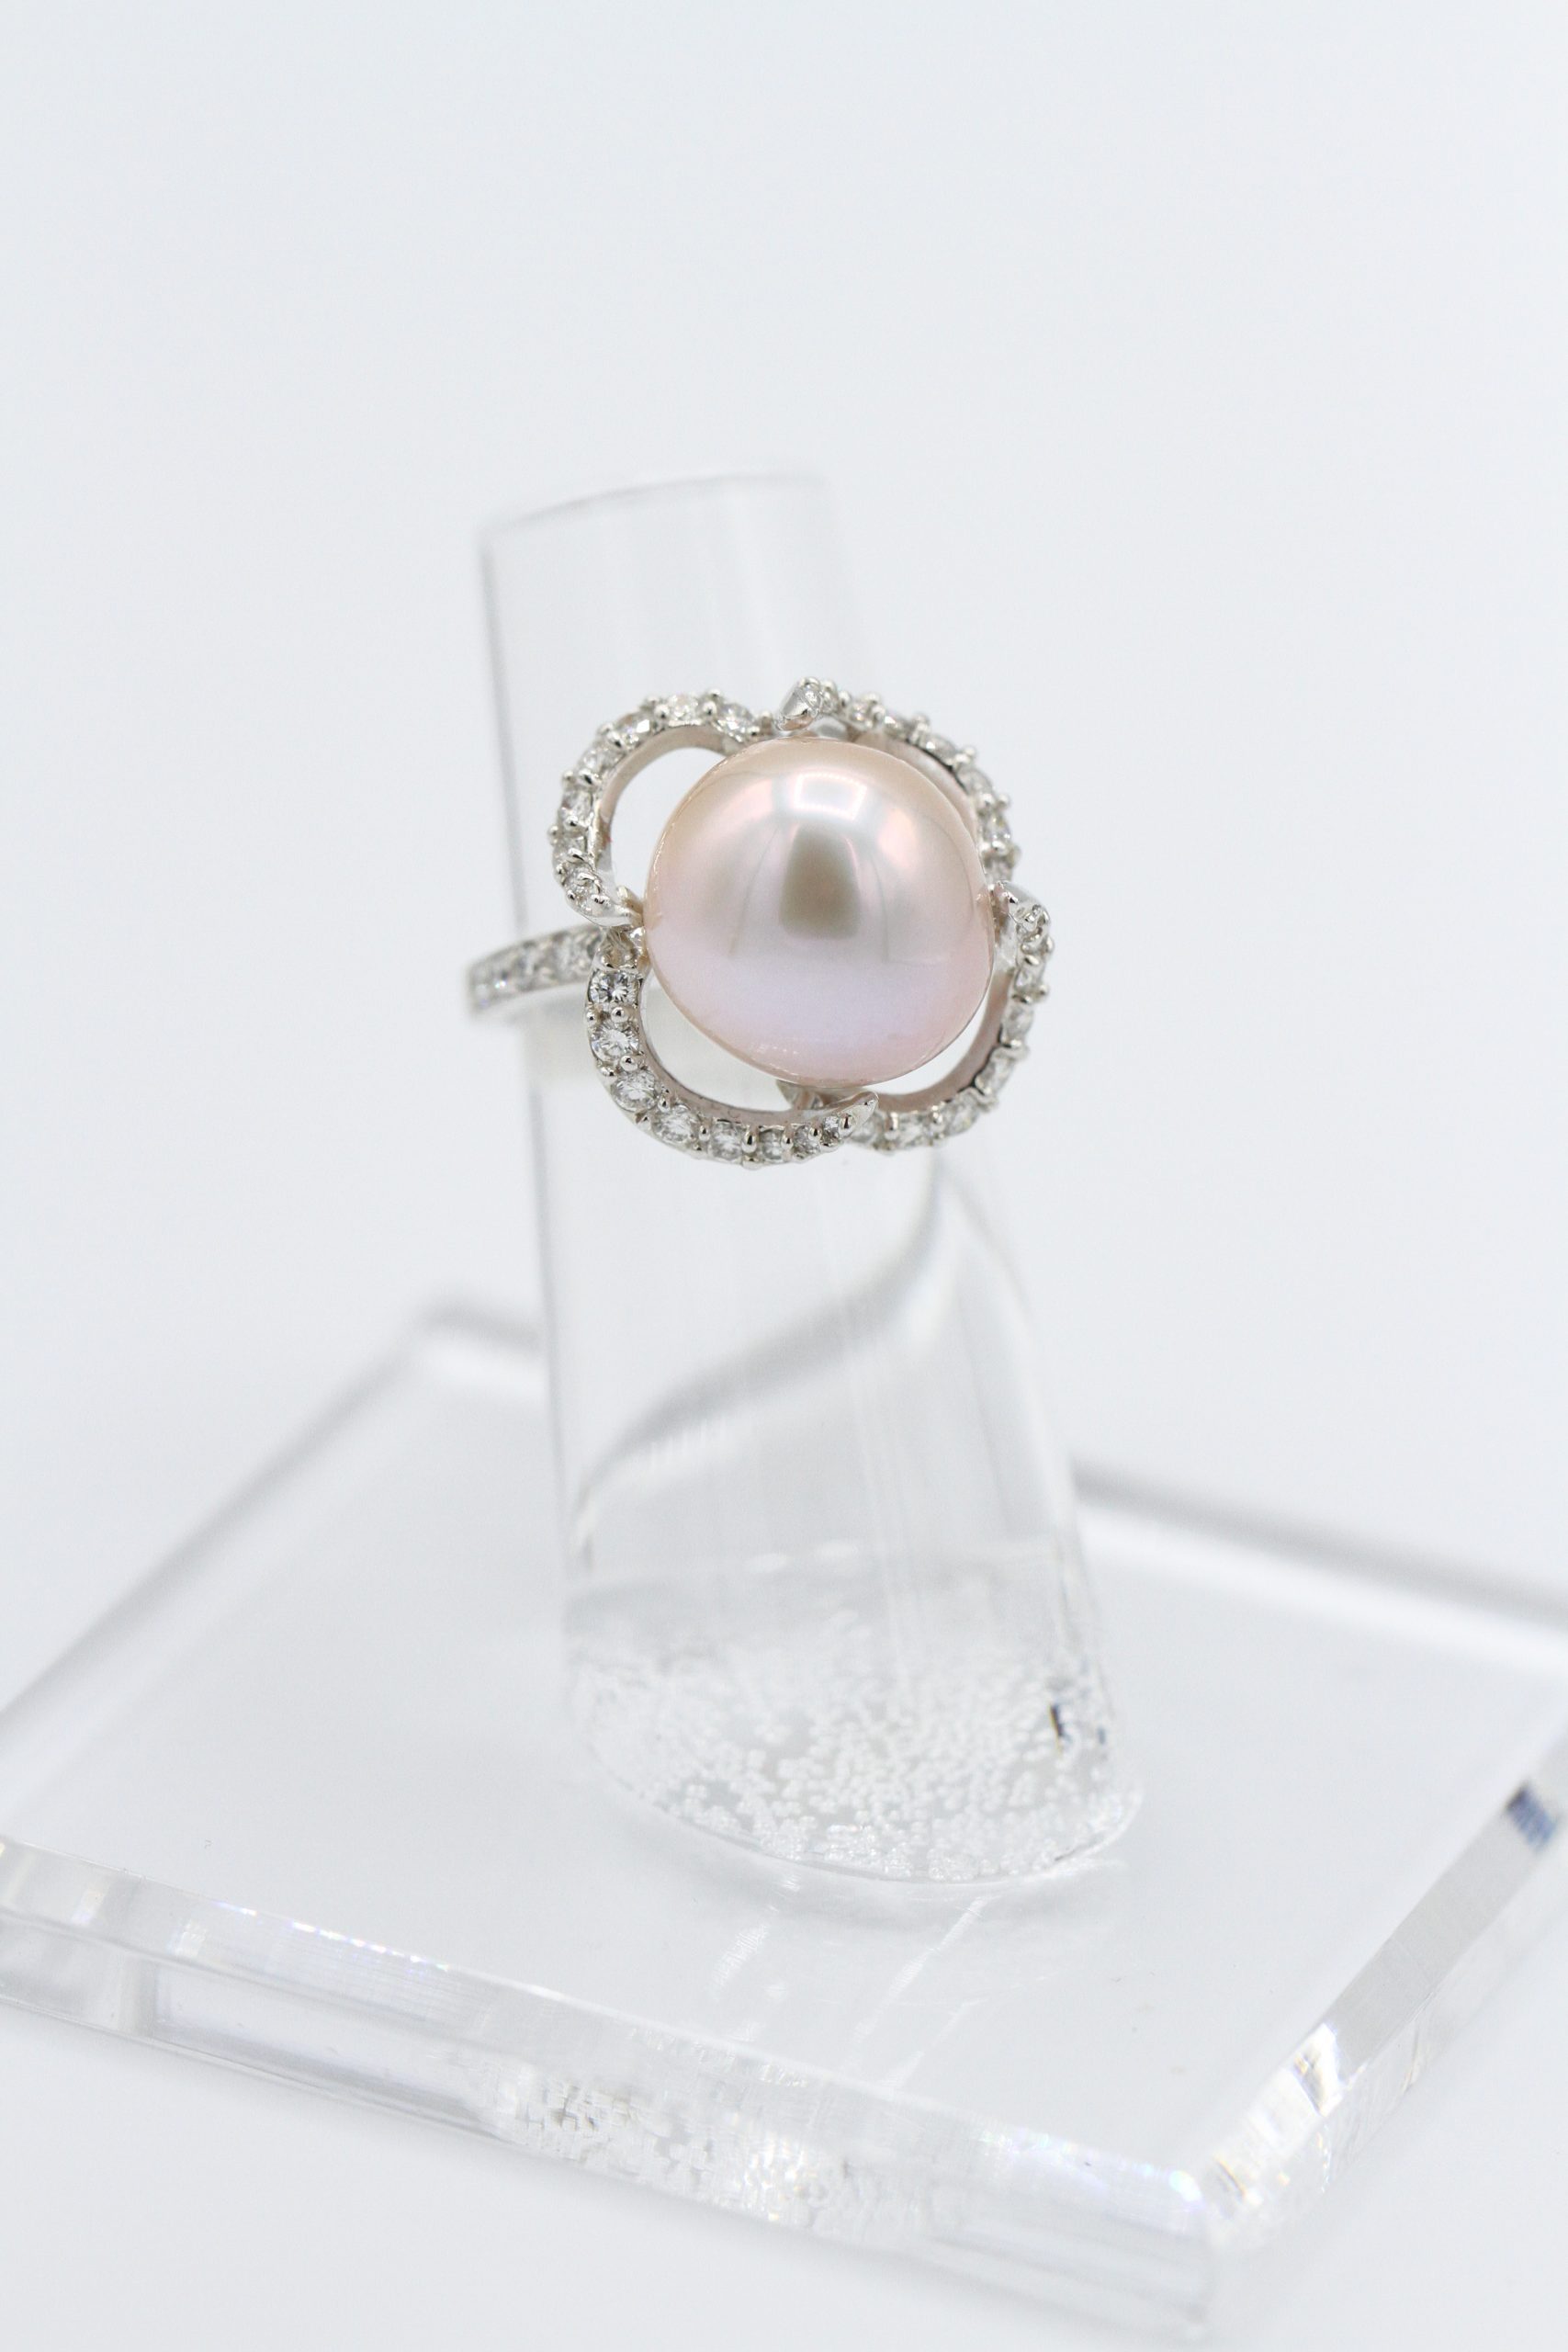 A ring with a pearl centerpiece